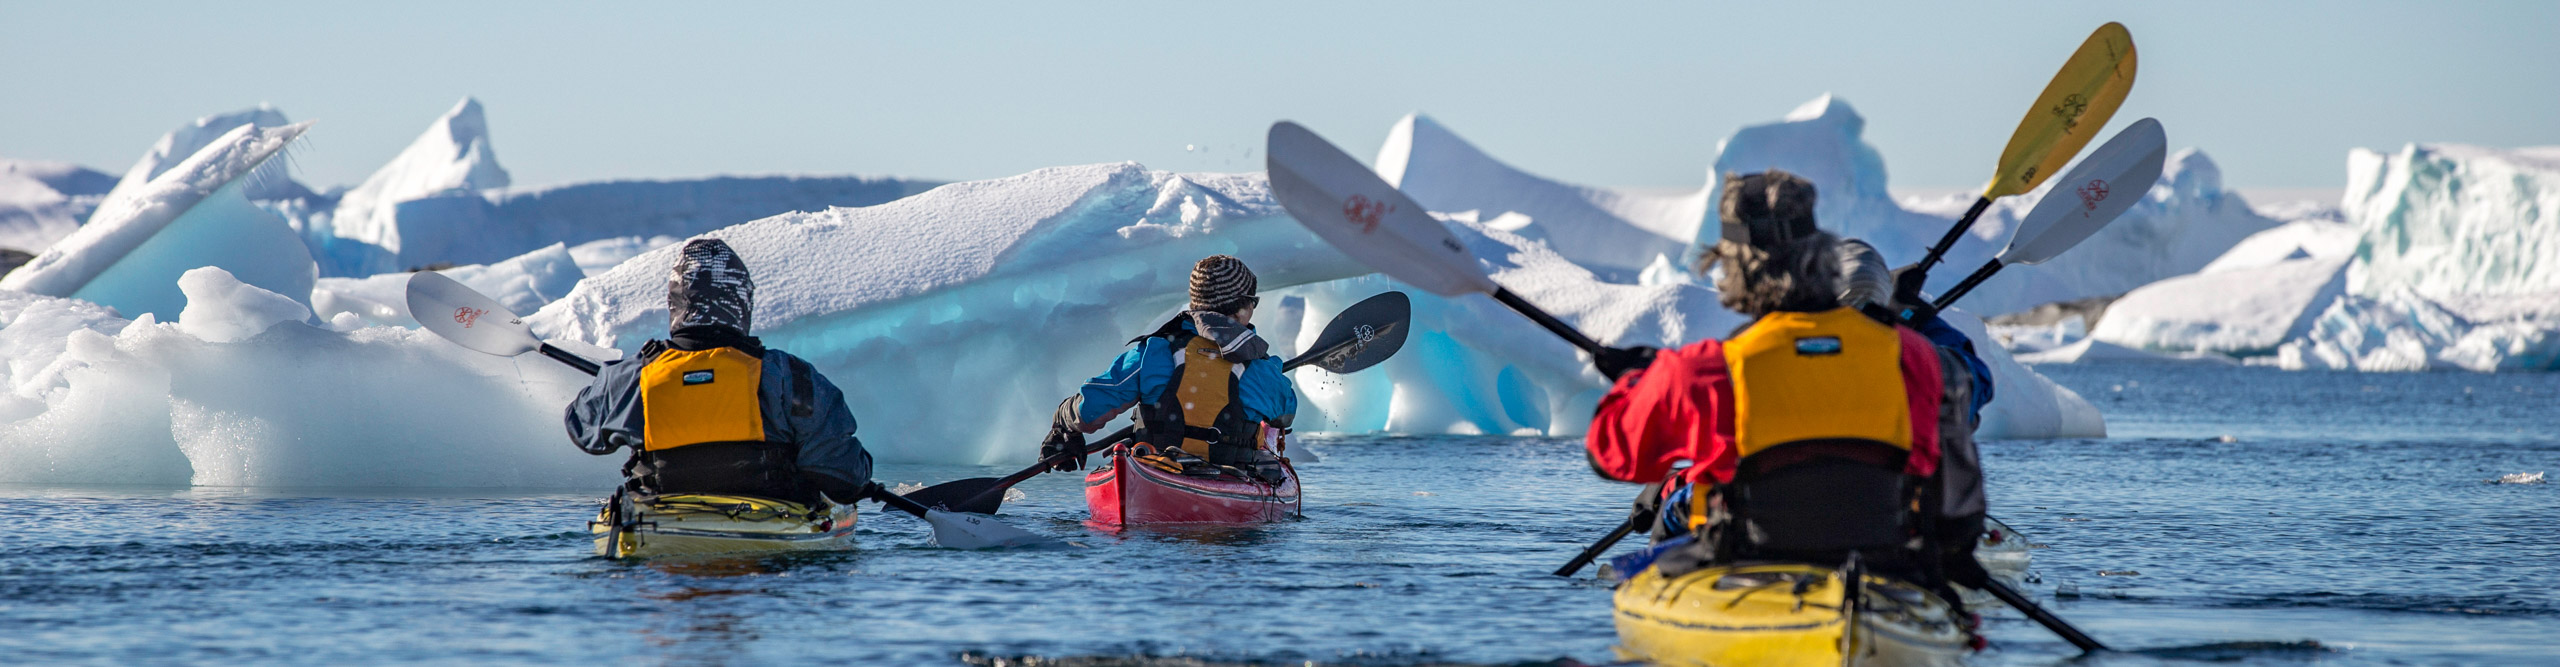 Group kayaking across the water near icebergs on a clear sunny day in Antarctica 